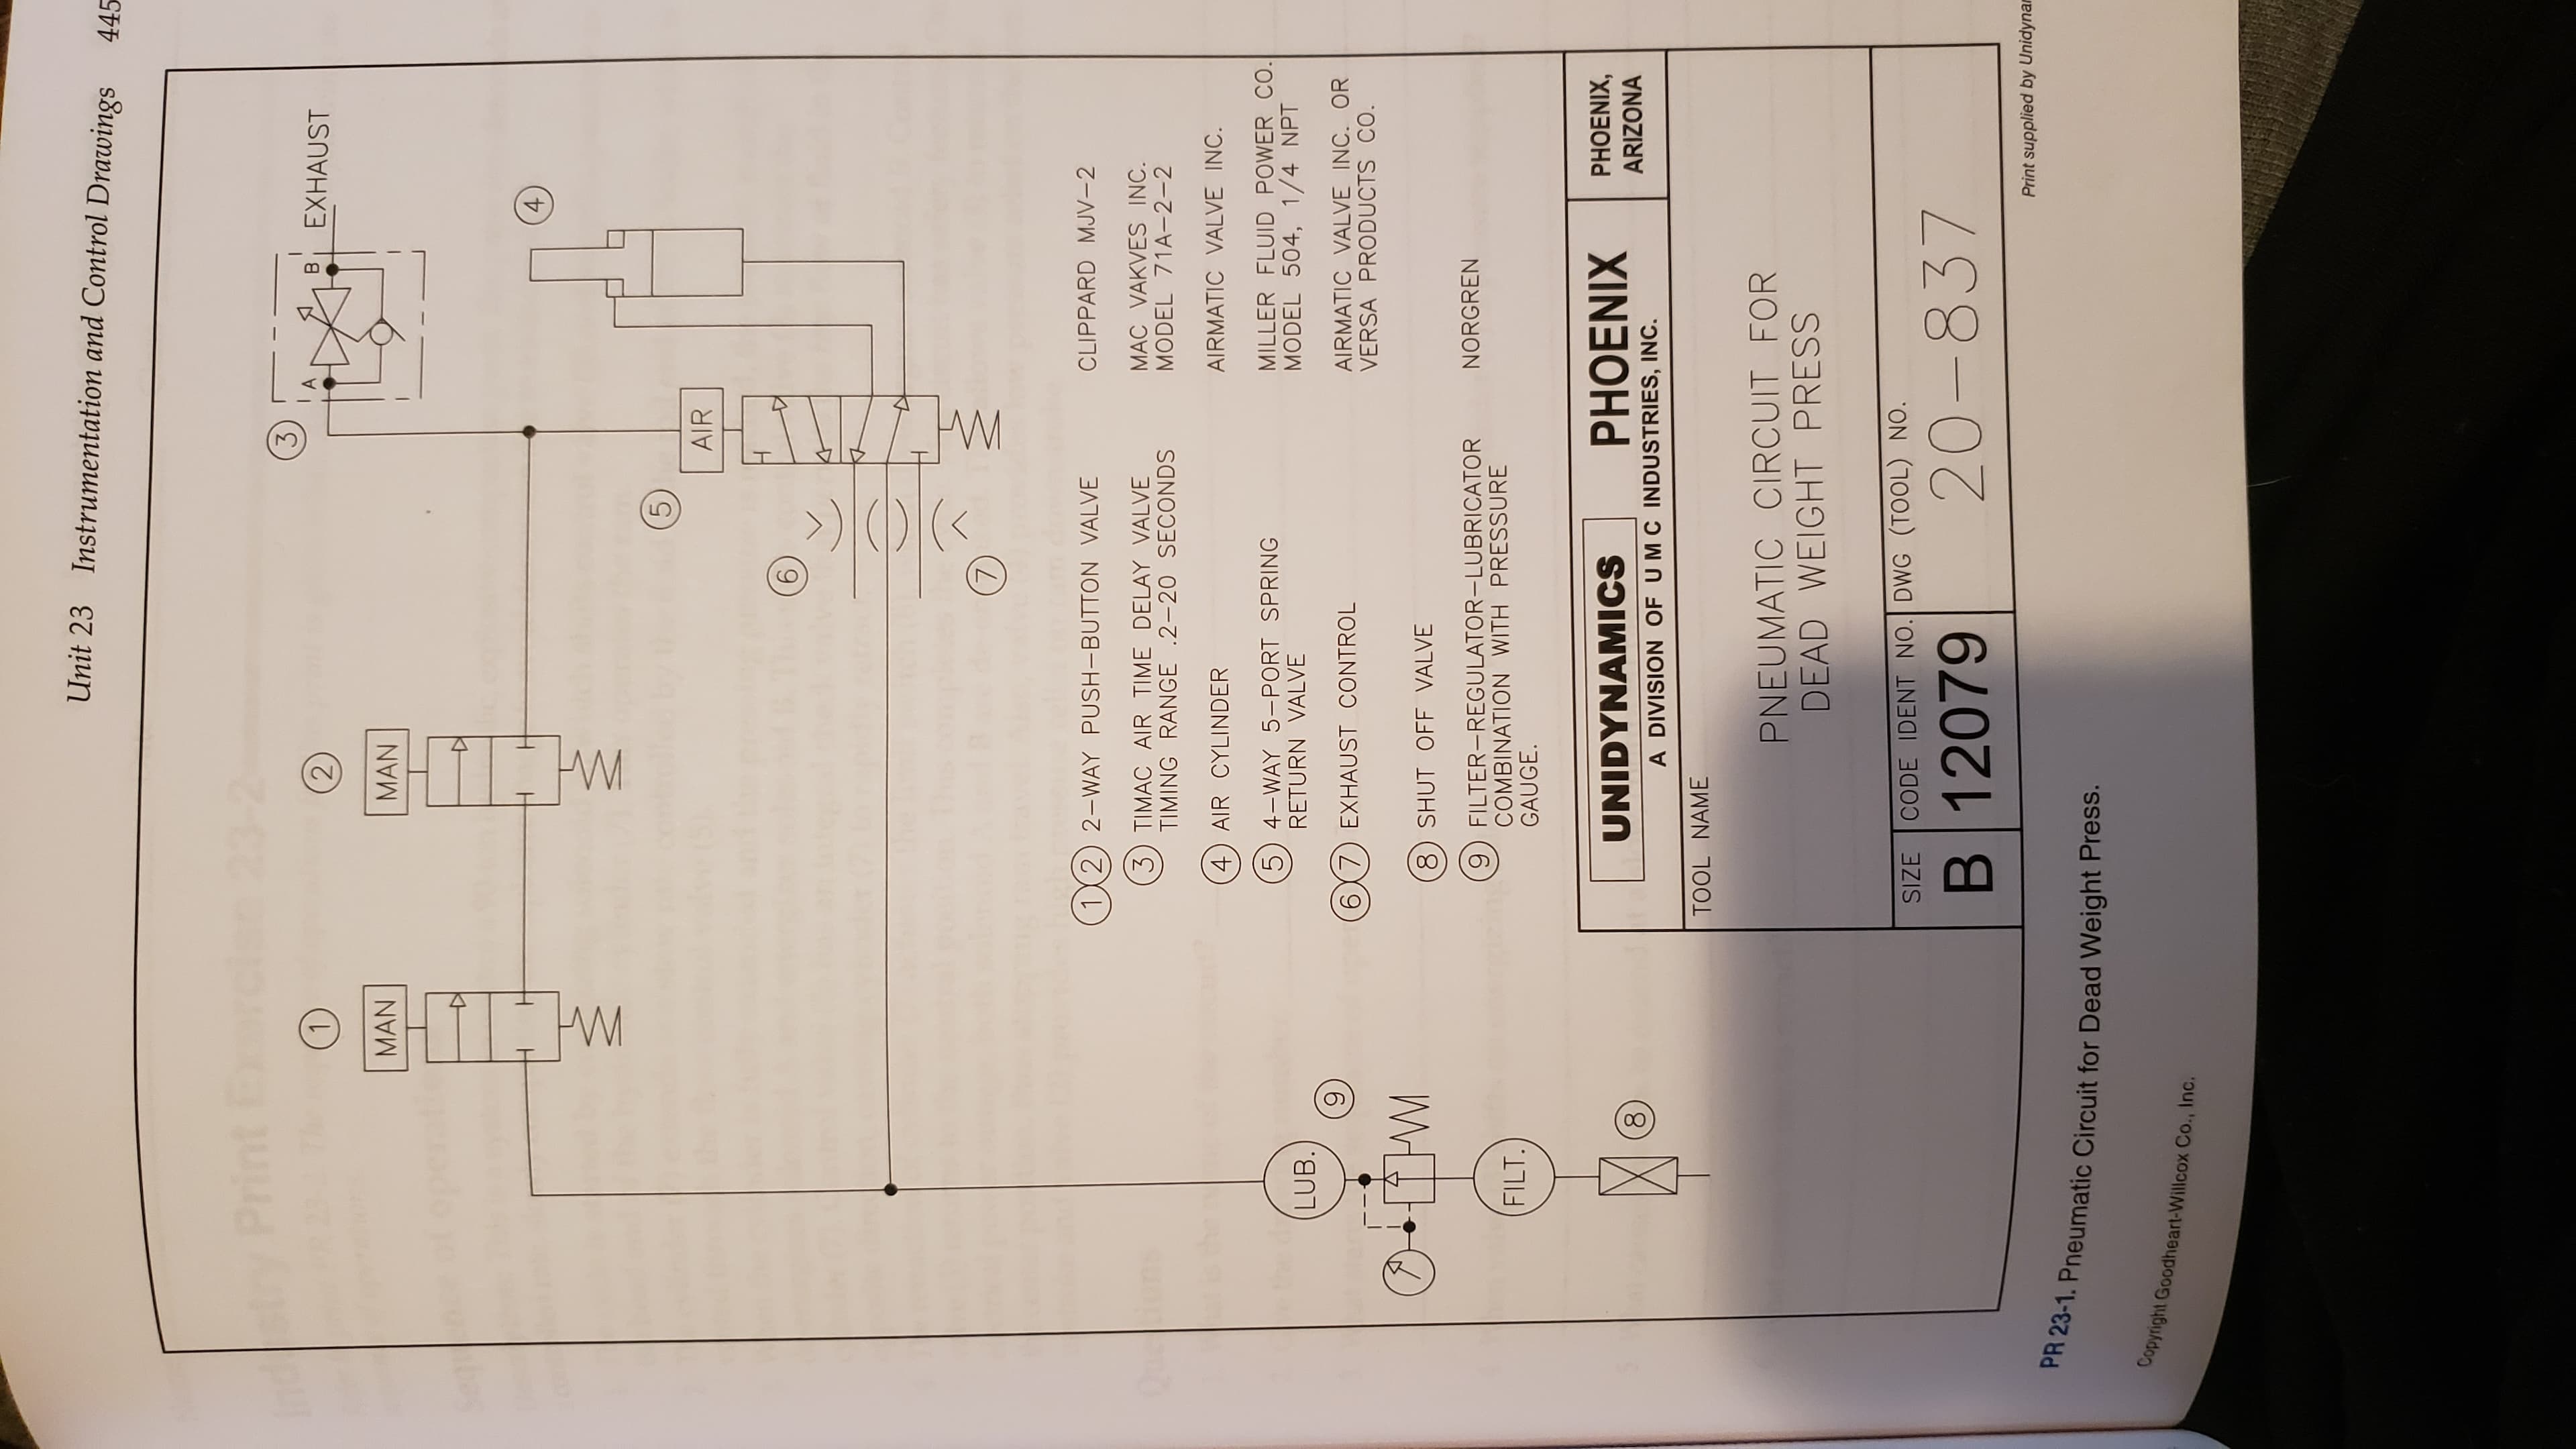 00
Unit 23
Instrumentation and Control Drawings
445
3
EXHAUST
MAN
MAN
T
AIR
9
L
(12) 2-WAY PUSH-BUTTON VALVE
CLIPPARD MJV-2
3) TIMAC AIR TIME DELAY VALVE
TIMING RANGE .2-20 SECONDS
MAC VAKVES INC.
MODEL 71A-2-2
4) AIR CYLINDER
AIRMATIC VALVE INC.
5) 4-WAY 5-PORT SPRING
RETURN VALVE
MILLER FLUID POWER CO.
MODEL 504, 1/4 NPT
LUB.
(67 EXHAUST CONTROL
AIRMATIC VALVE INC. OR
VERSA PRODUCTS CO.
6
8) SHUT OFF VALVE
9 FILTER-REGULATOR-LUBRICATOR
COMBINATION WITH PRESSURE
GAUGE.
NORGREN
FILT.
UNIDYNAMICS
PHOENIX
PHOENIX,
ARIZONA
A DIVISION OF UMC INDUSTRIES, INC.
TOOL NAME
PNEUMATIC CIRCUIT FOR
DEAD WEIGHT PRESS
CODE IDENT NO. DWG (TOOL) NO.
3ZIS
B 12079
20-837
Print supplied by Unidynar
PH 23-1. Pneumatic Circuit for Dead Weight Press.
Copyright Goodheart-Willcox Co., Inc.
